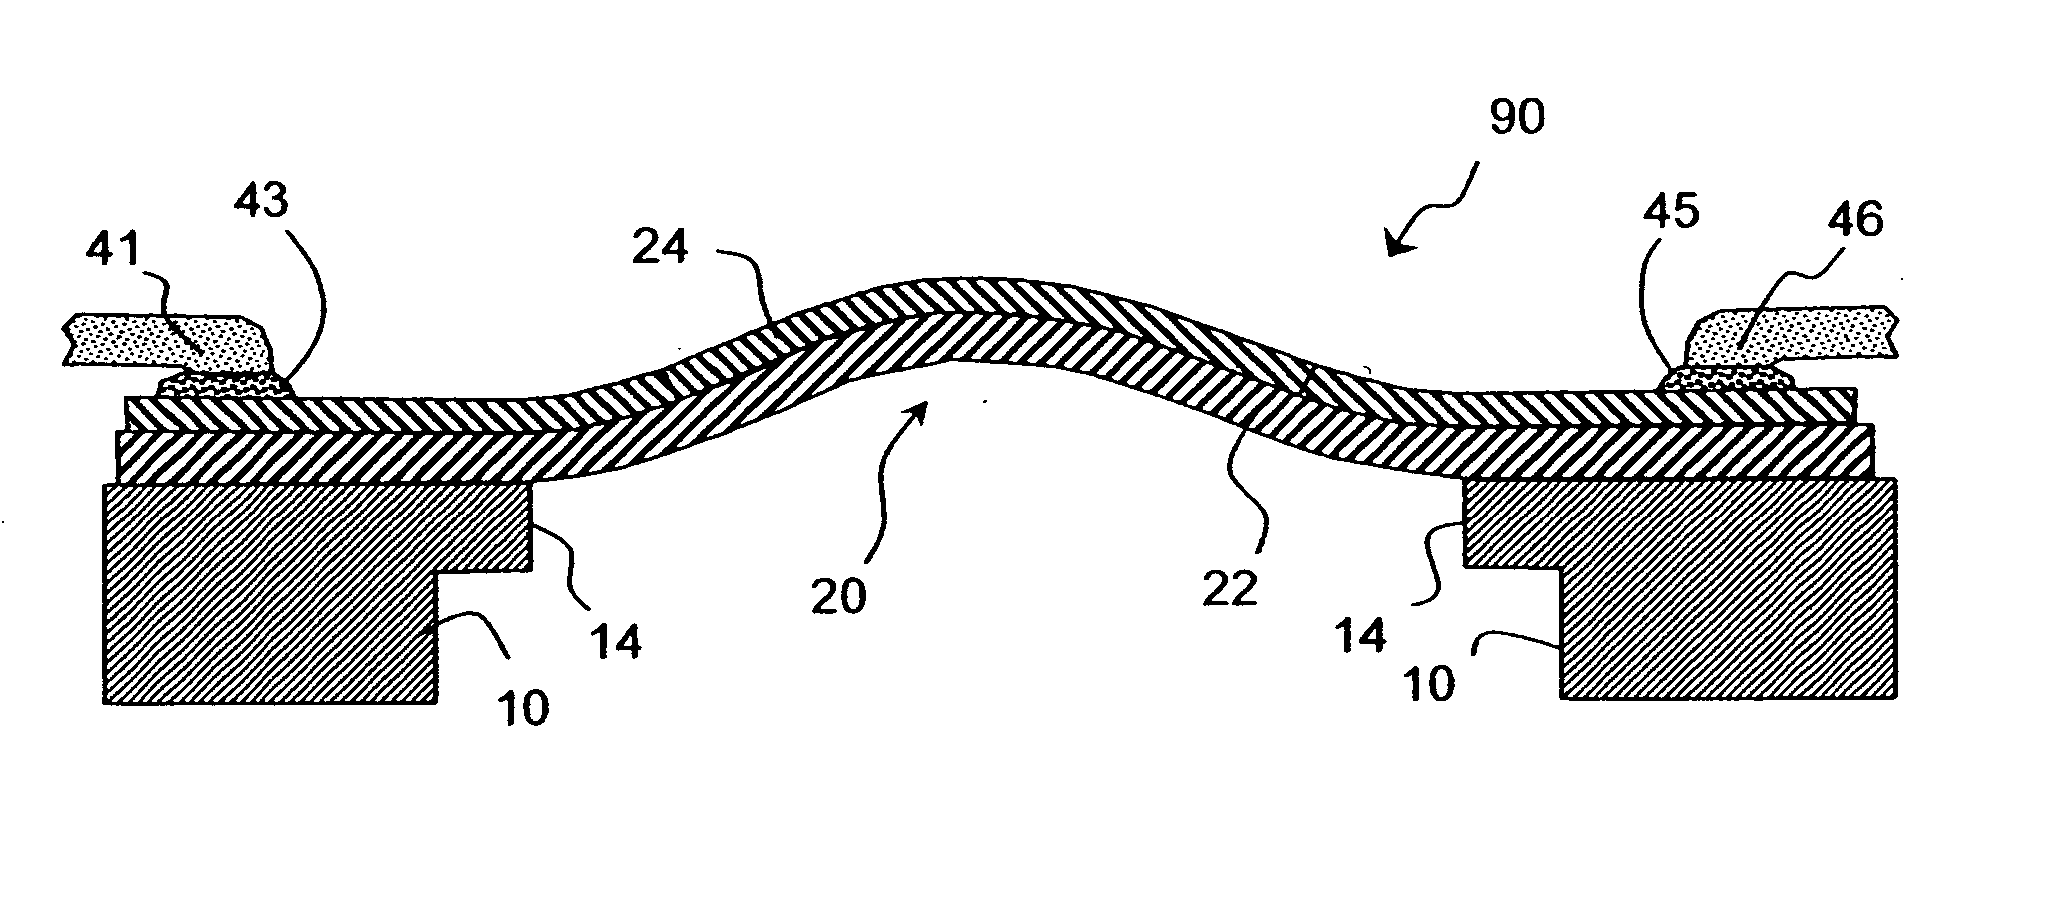 Doubly-anchored thermal actuator having varying flexural rigidity